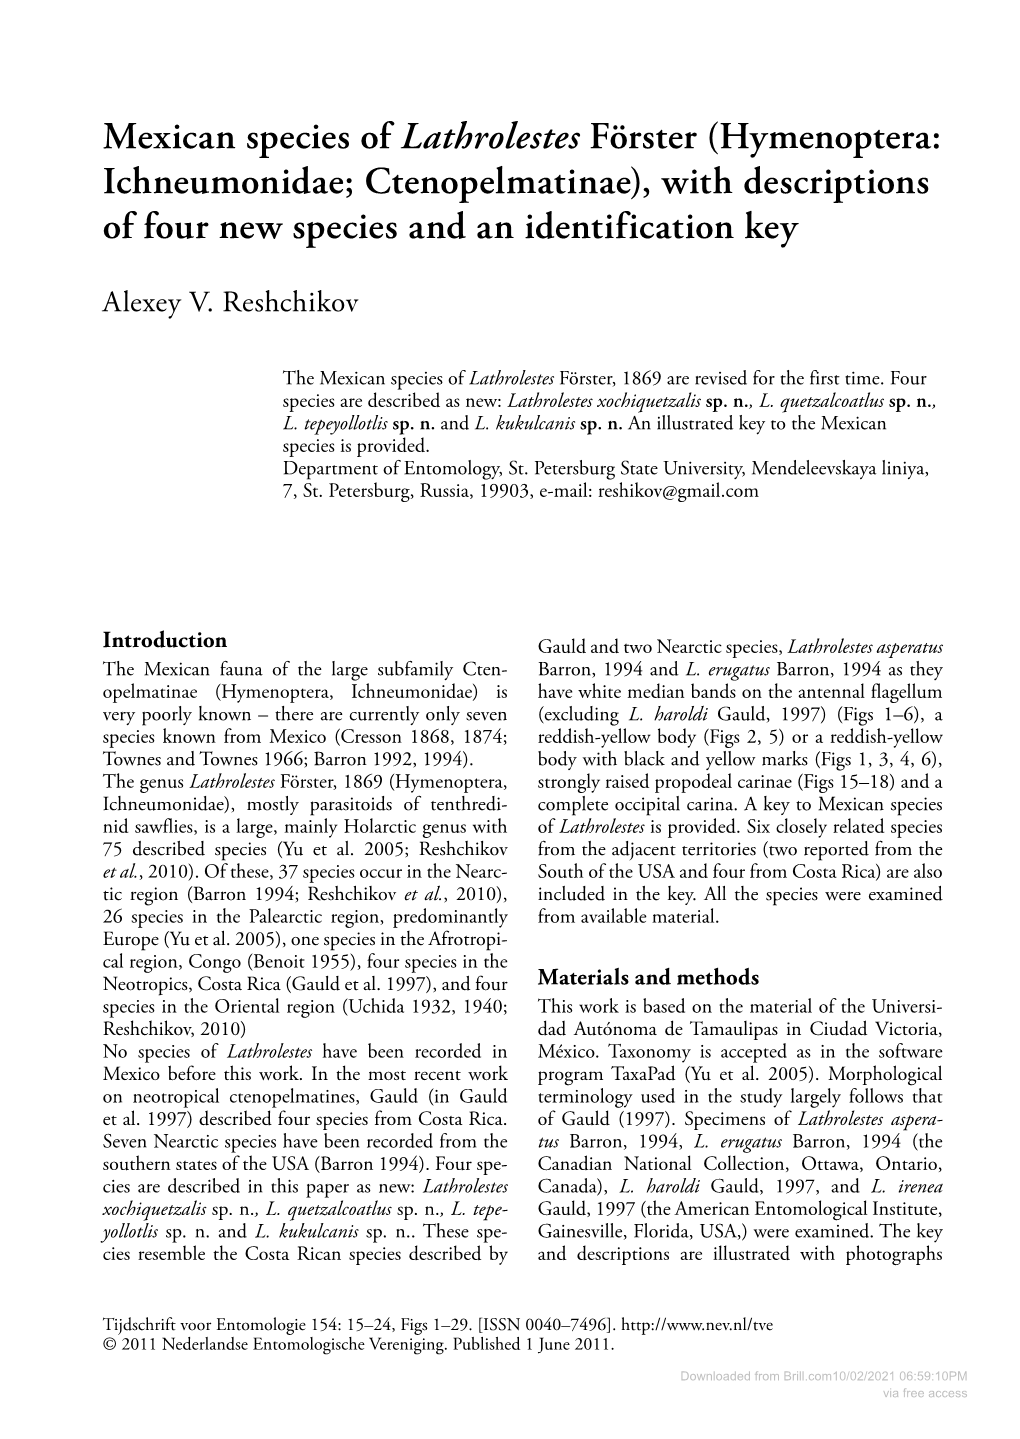 Hymenoptera: Ichneumonidae; Ctenopelmatinae), with Descriptions of Four New Species and an Identification Key